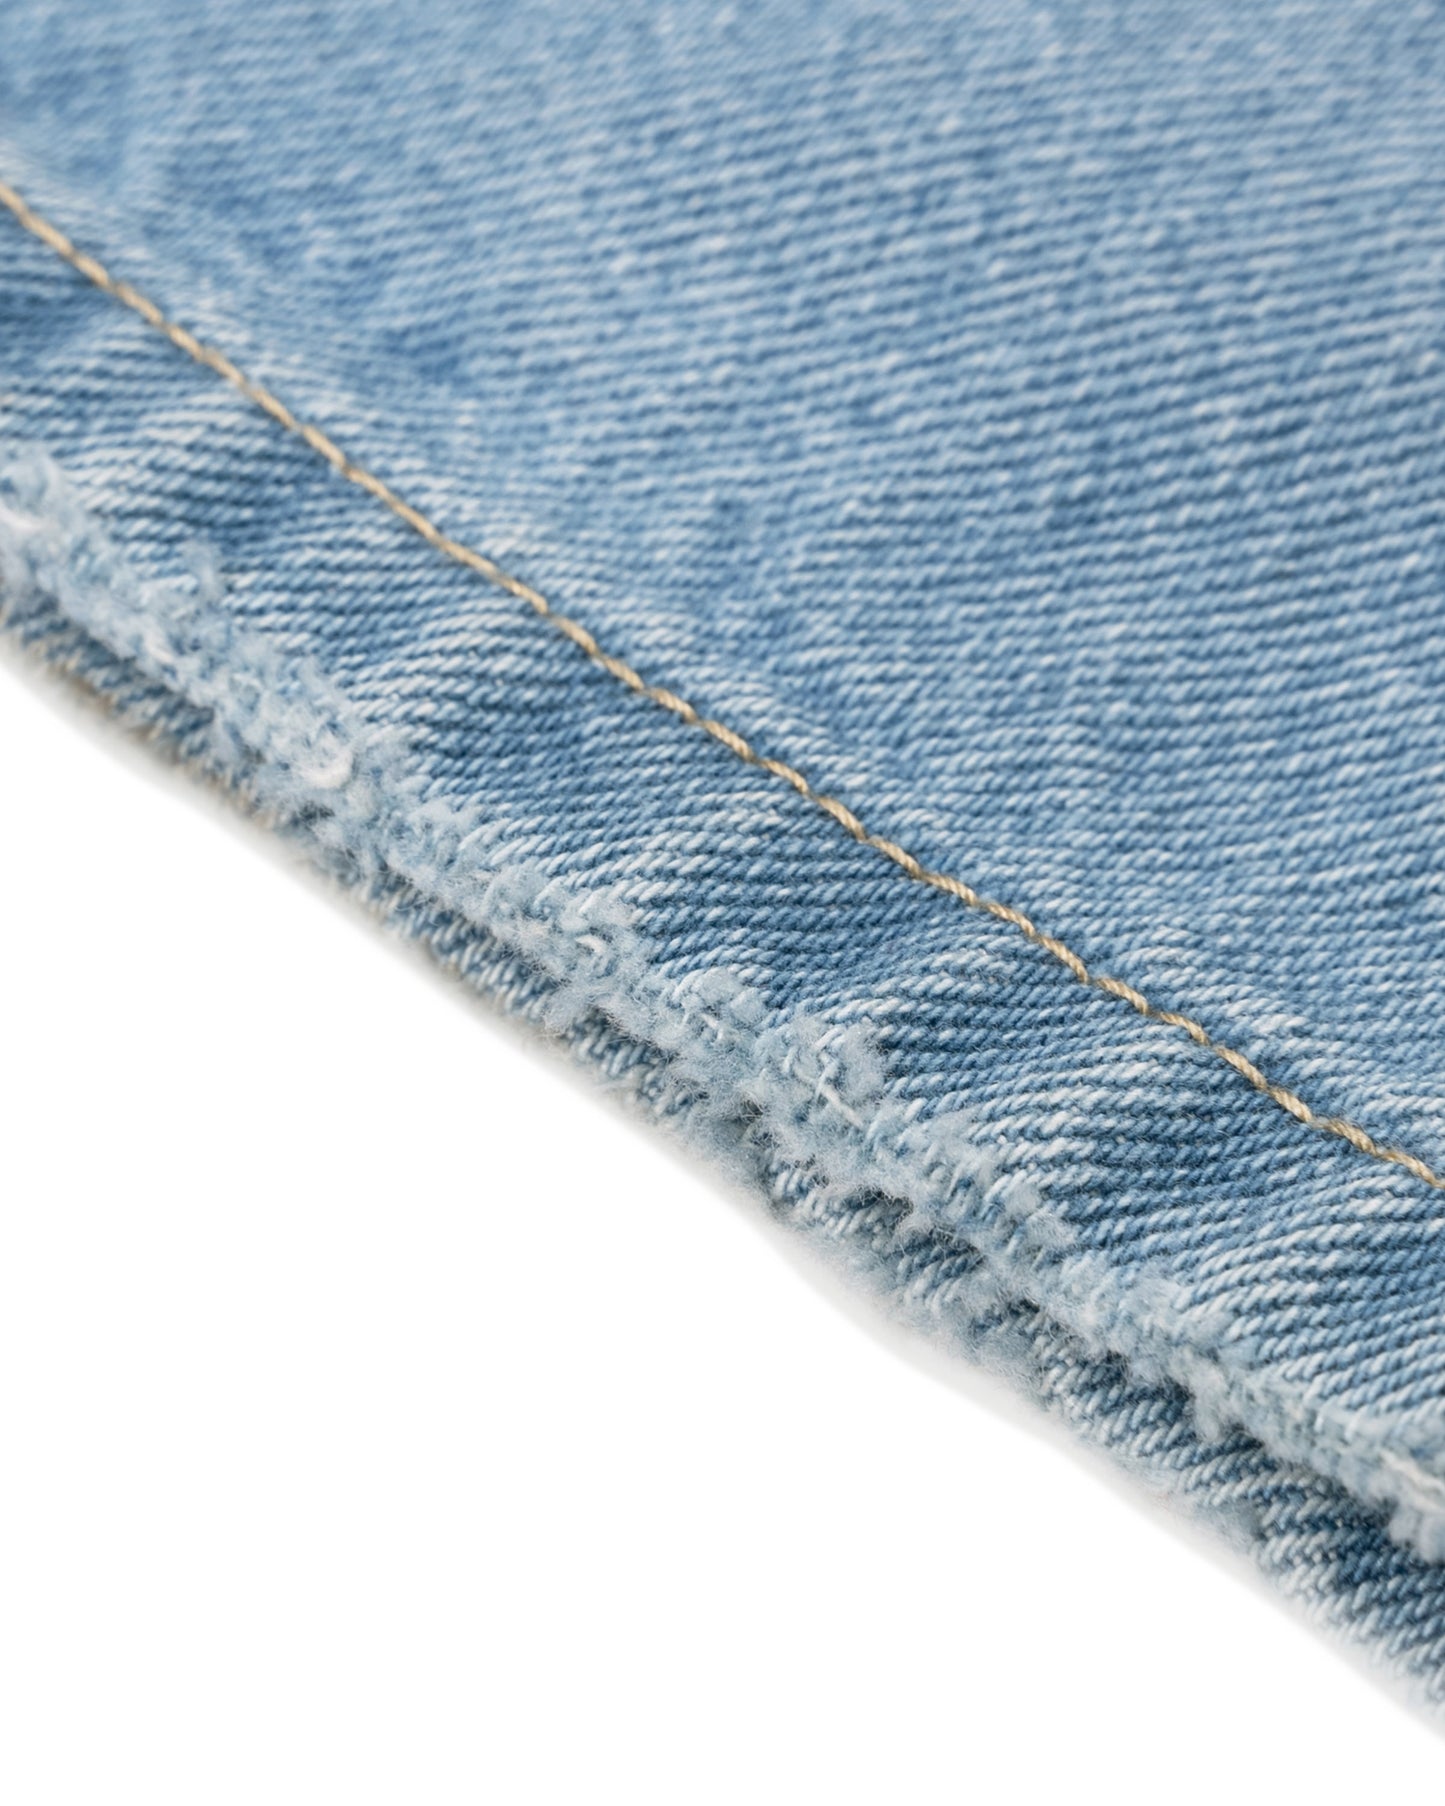 Levents® Classic Straight Jeans/ Blue